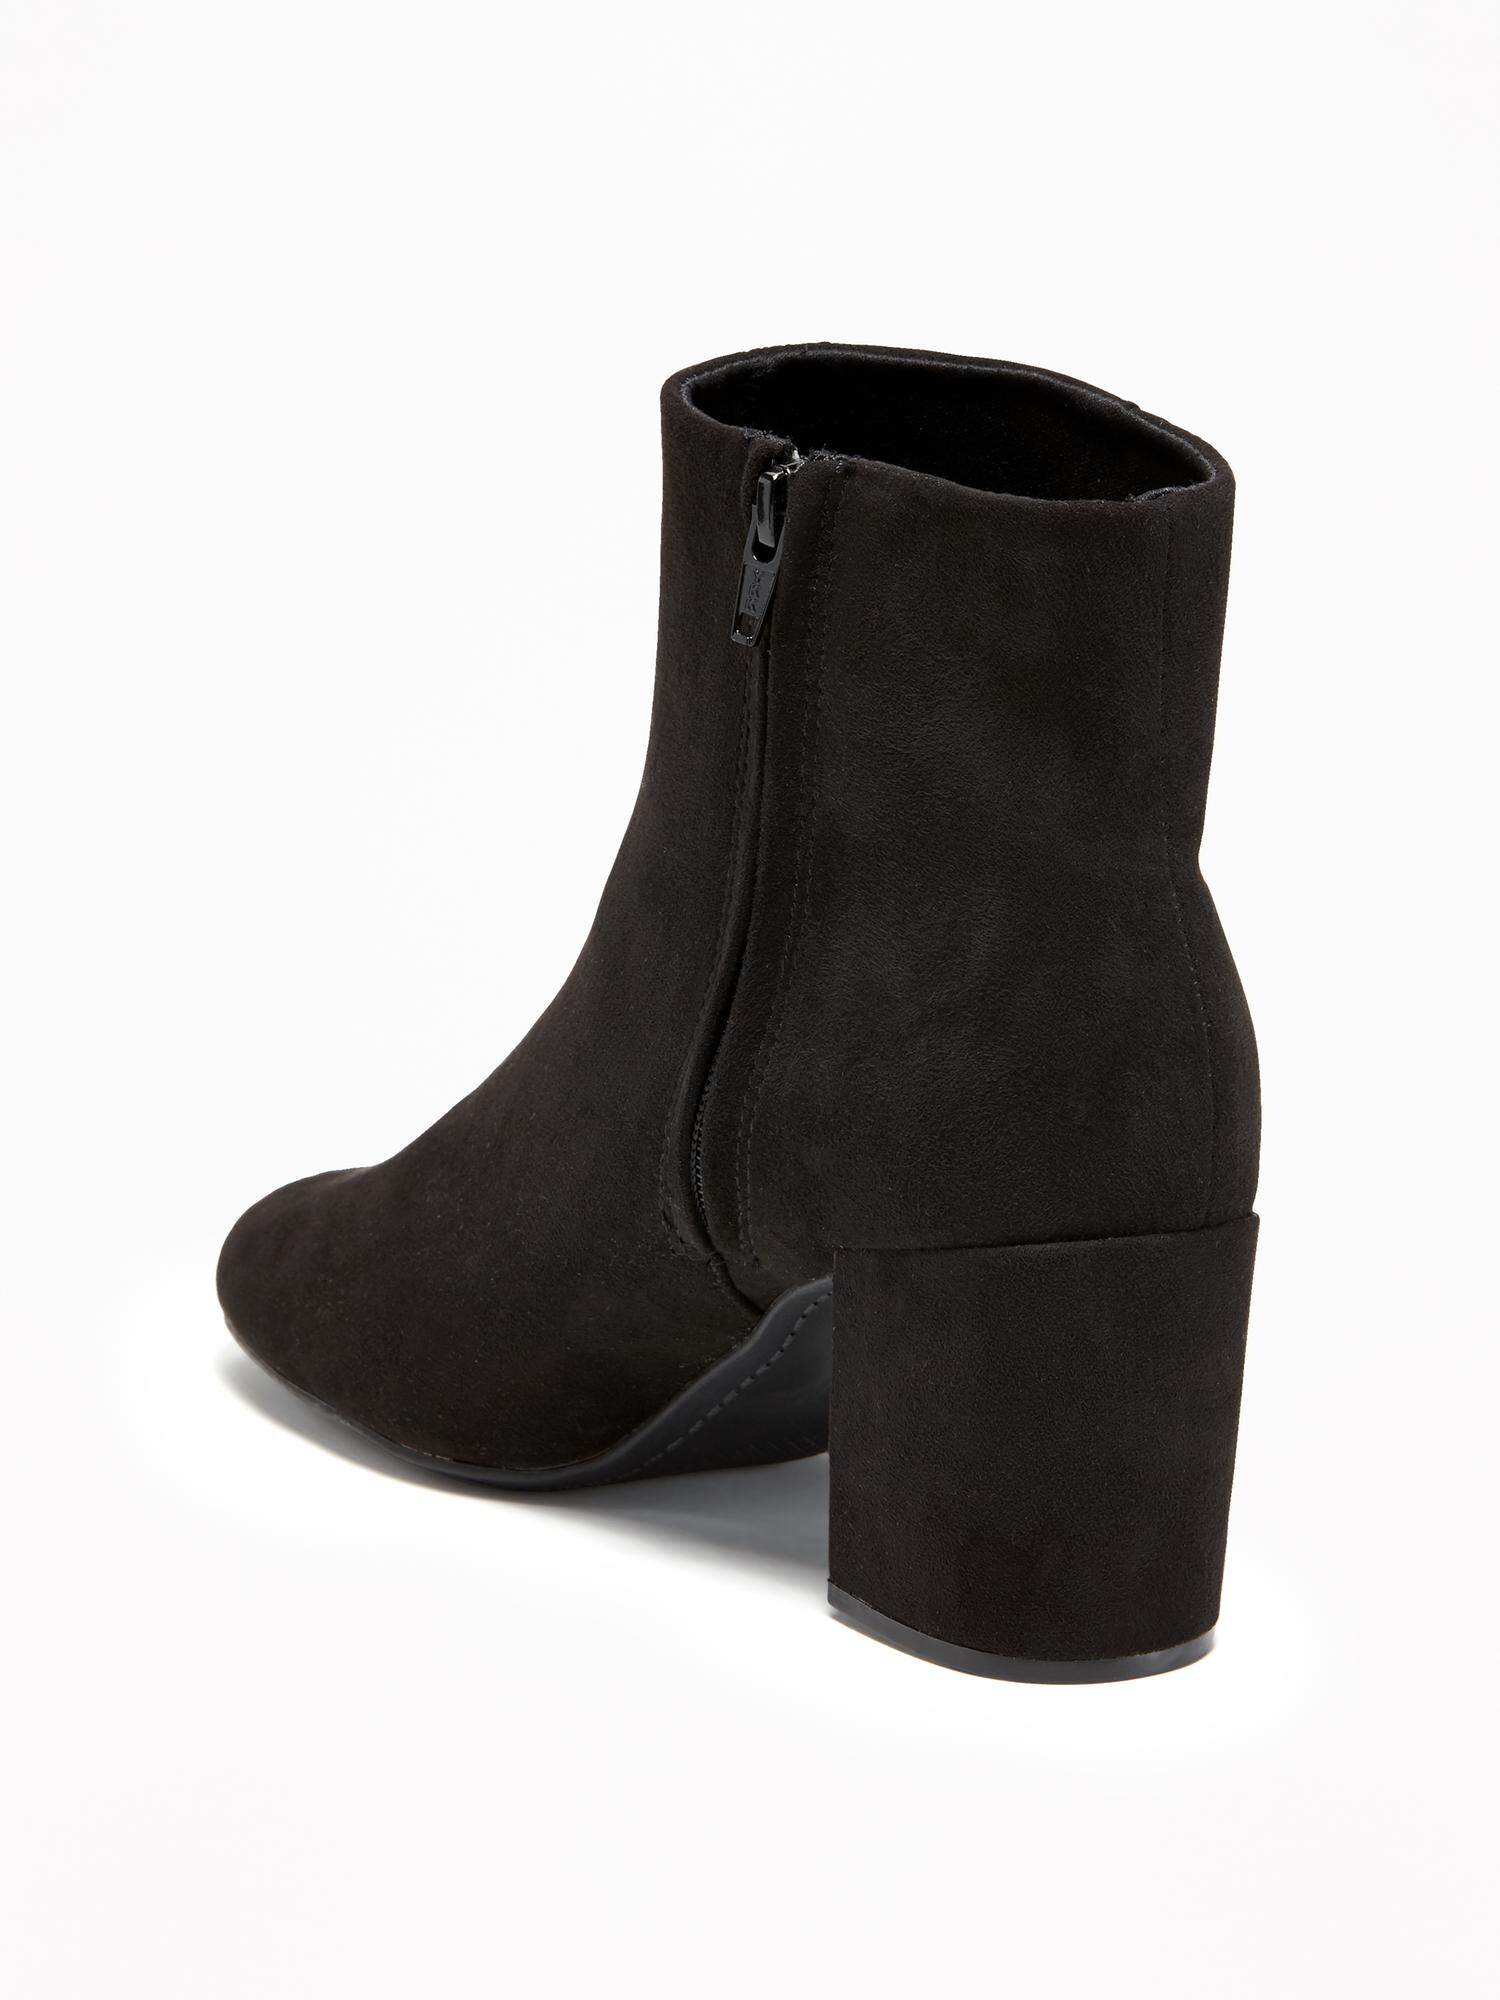 Sueded Ankle Boots for Women